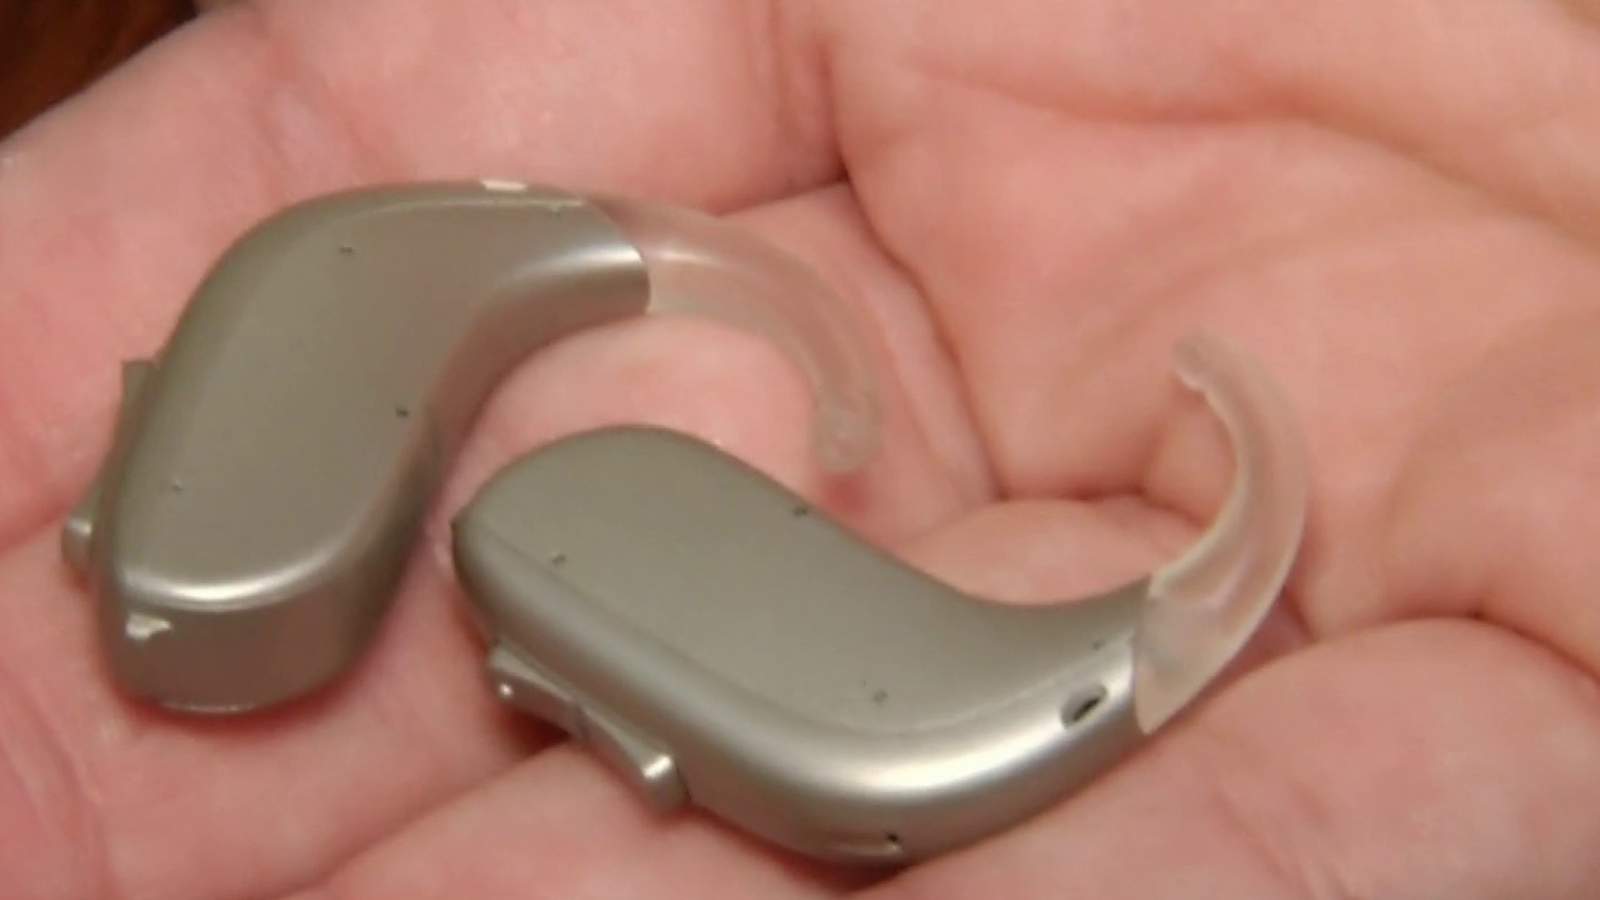 Giving away hearing aids ‘more important than usual’ during pandemic, doctor says